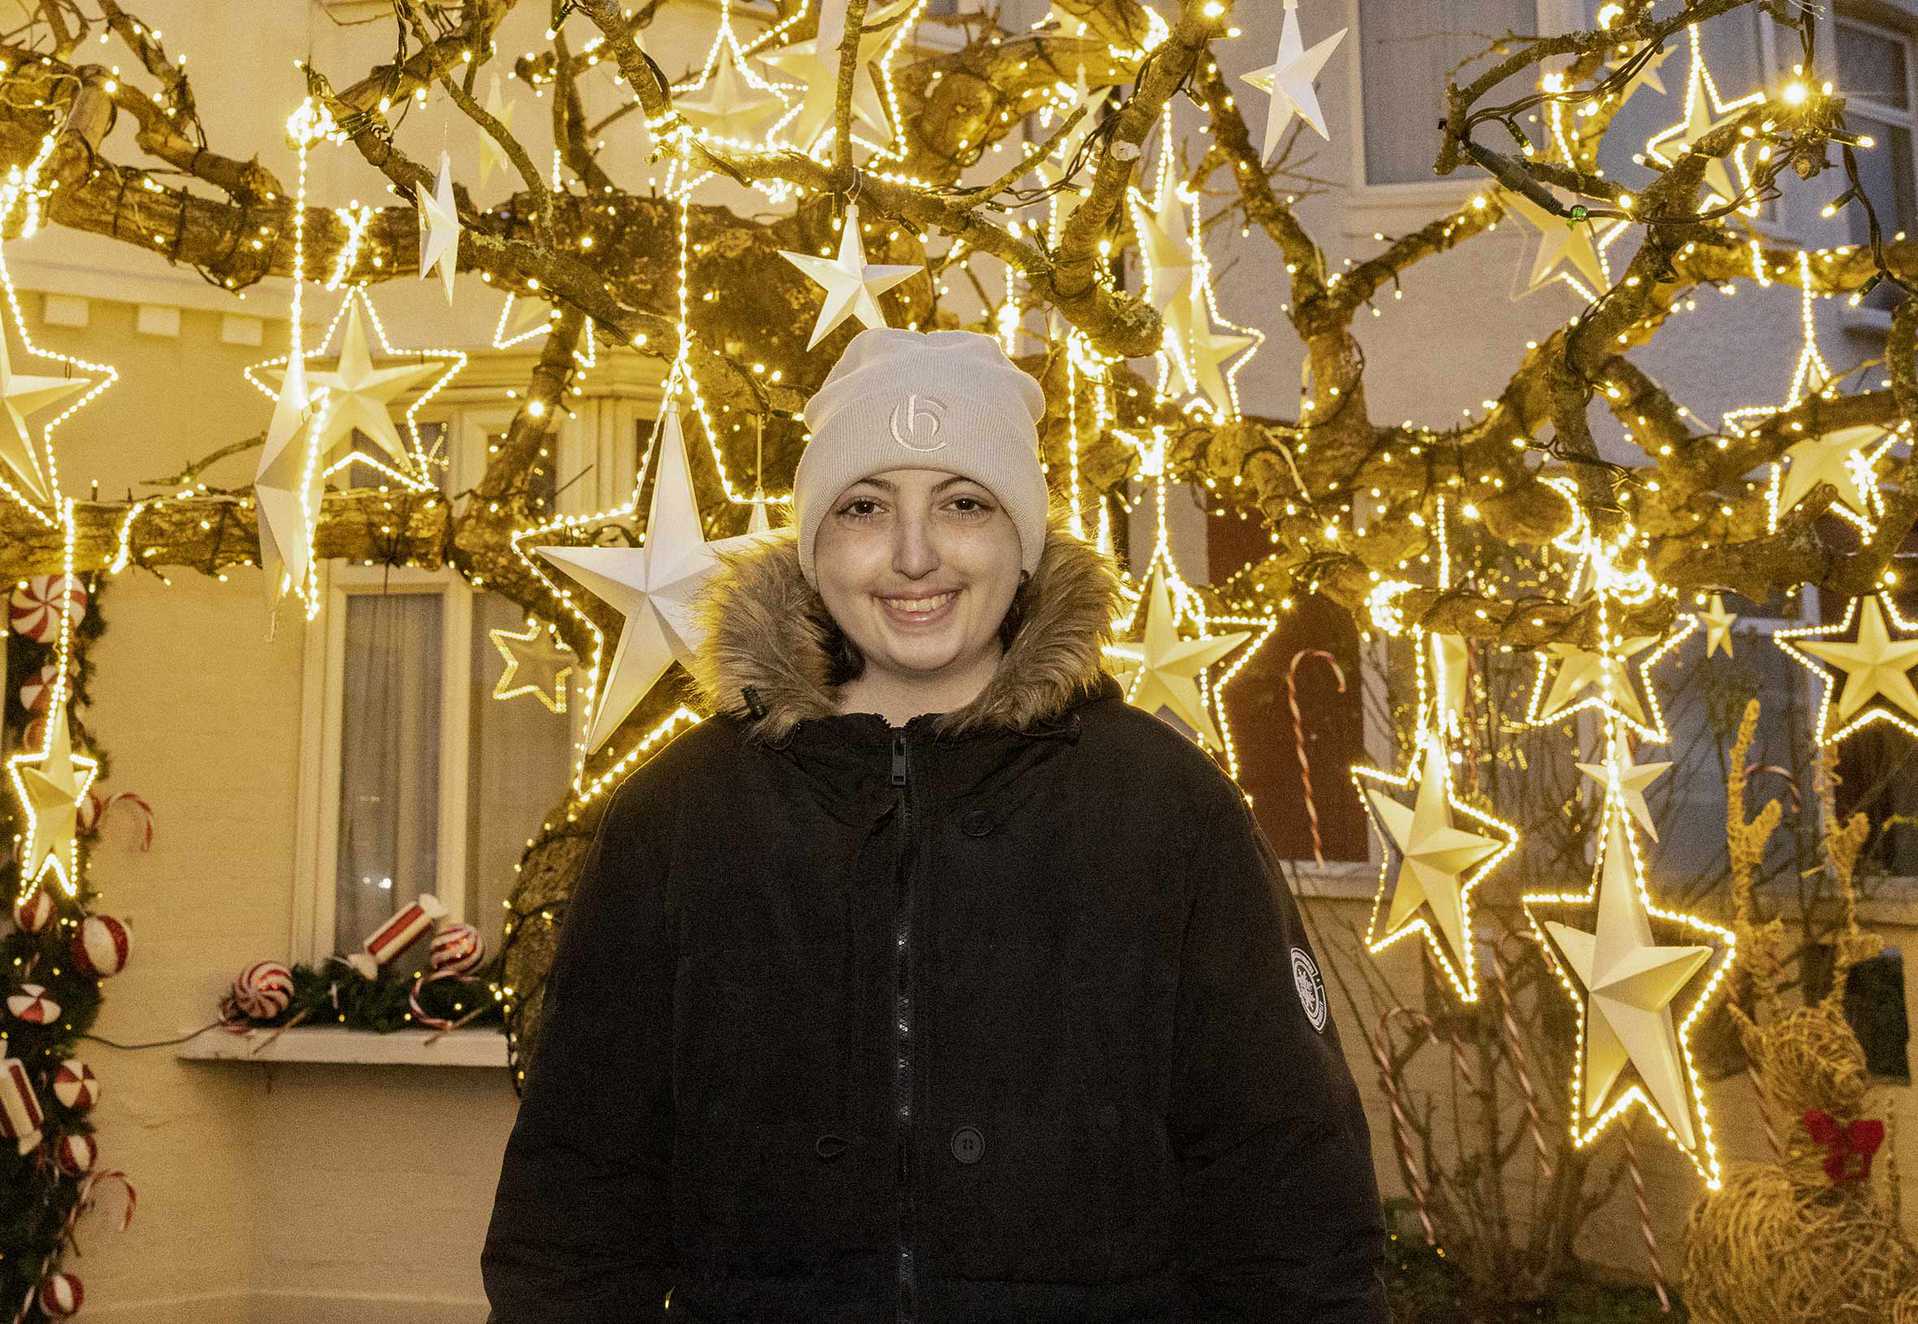 Ellie standing in front of the brightly lit wish tree, outside her house - Image © Phil Harris, Daily Mirror.